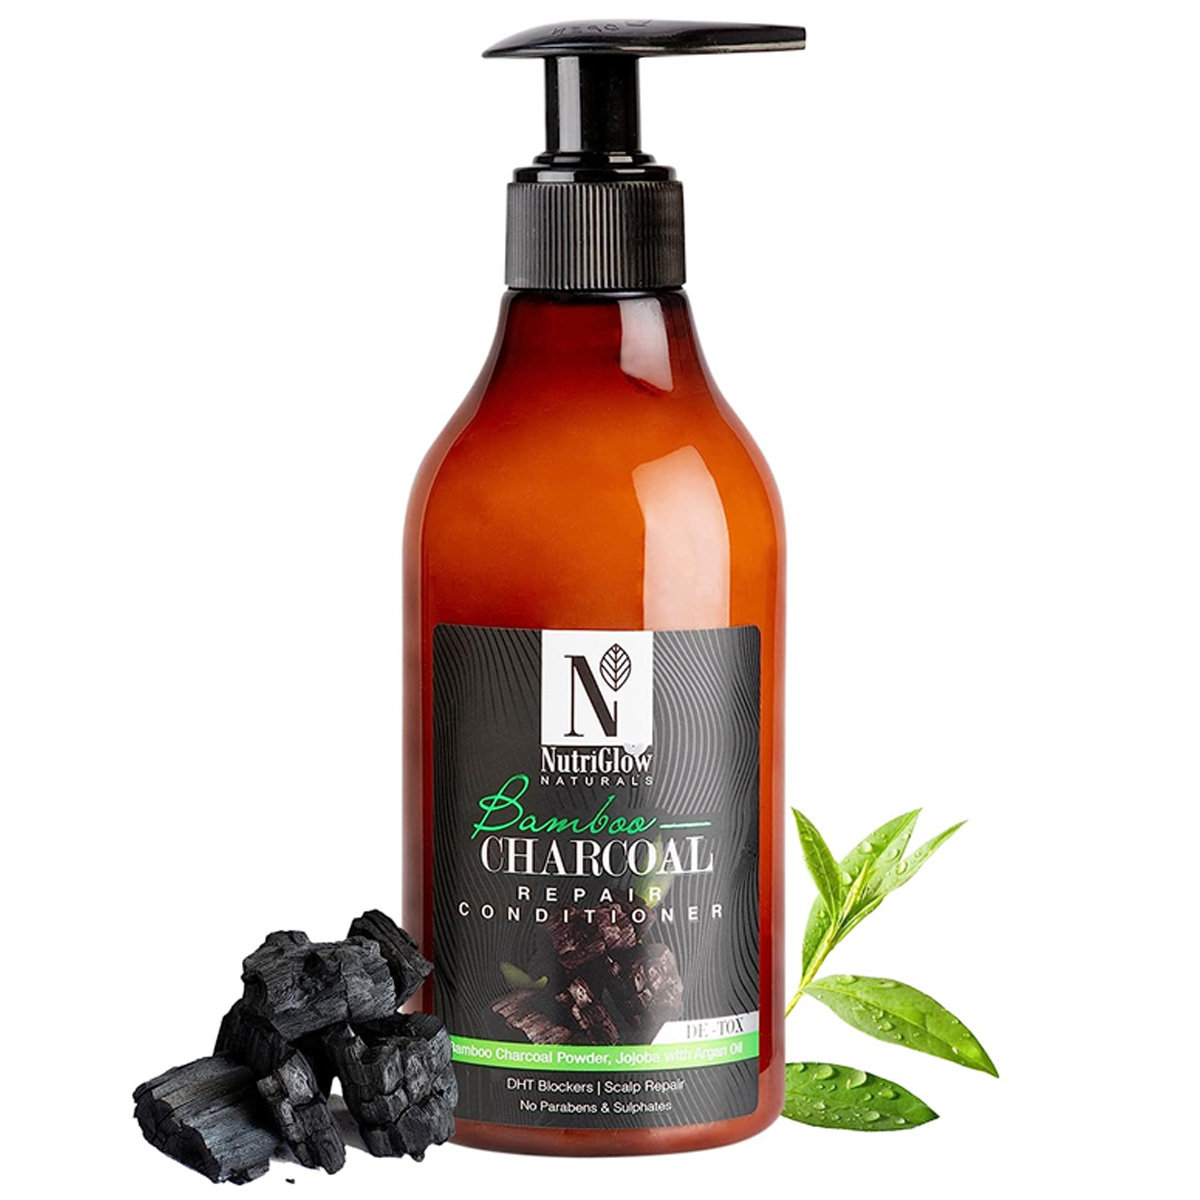 Nutriglow Natural's Bamboo & Charcoal Repair Conditioner, 300ml